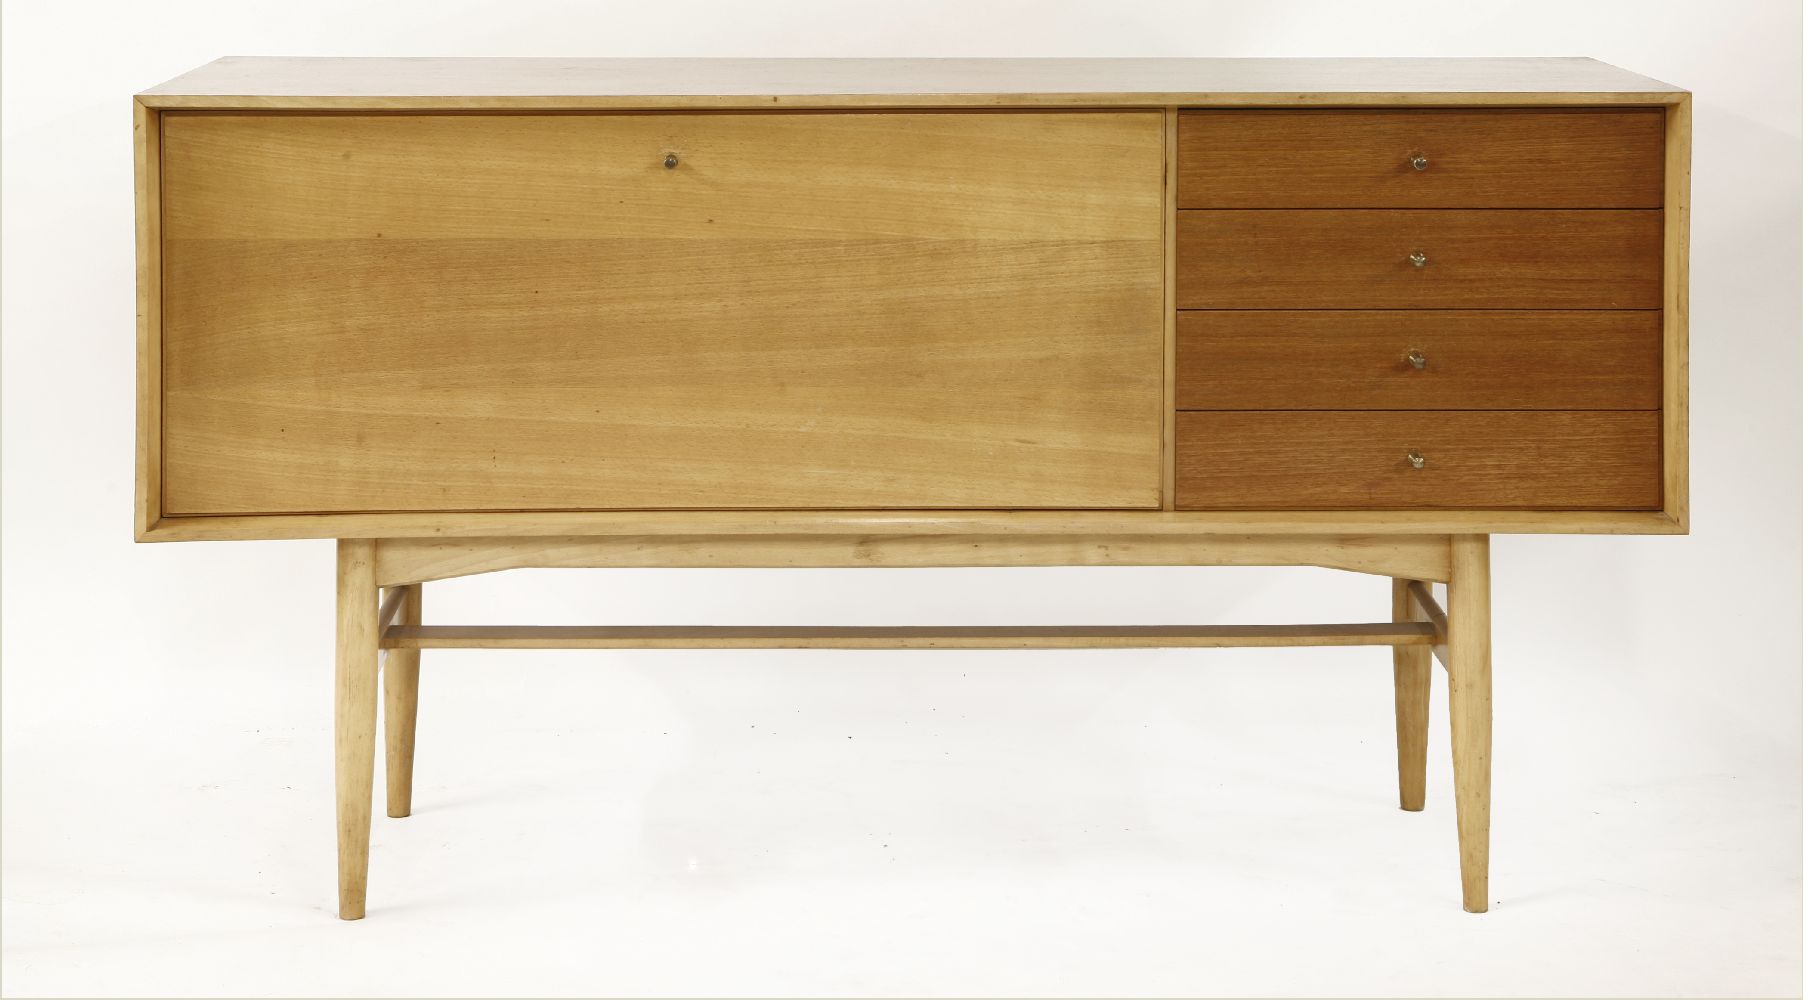 An Heal's teak and oak sideboard,with a hinged drop cabinet and four drawers, with Heal's label to